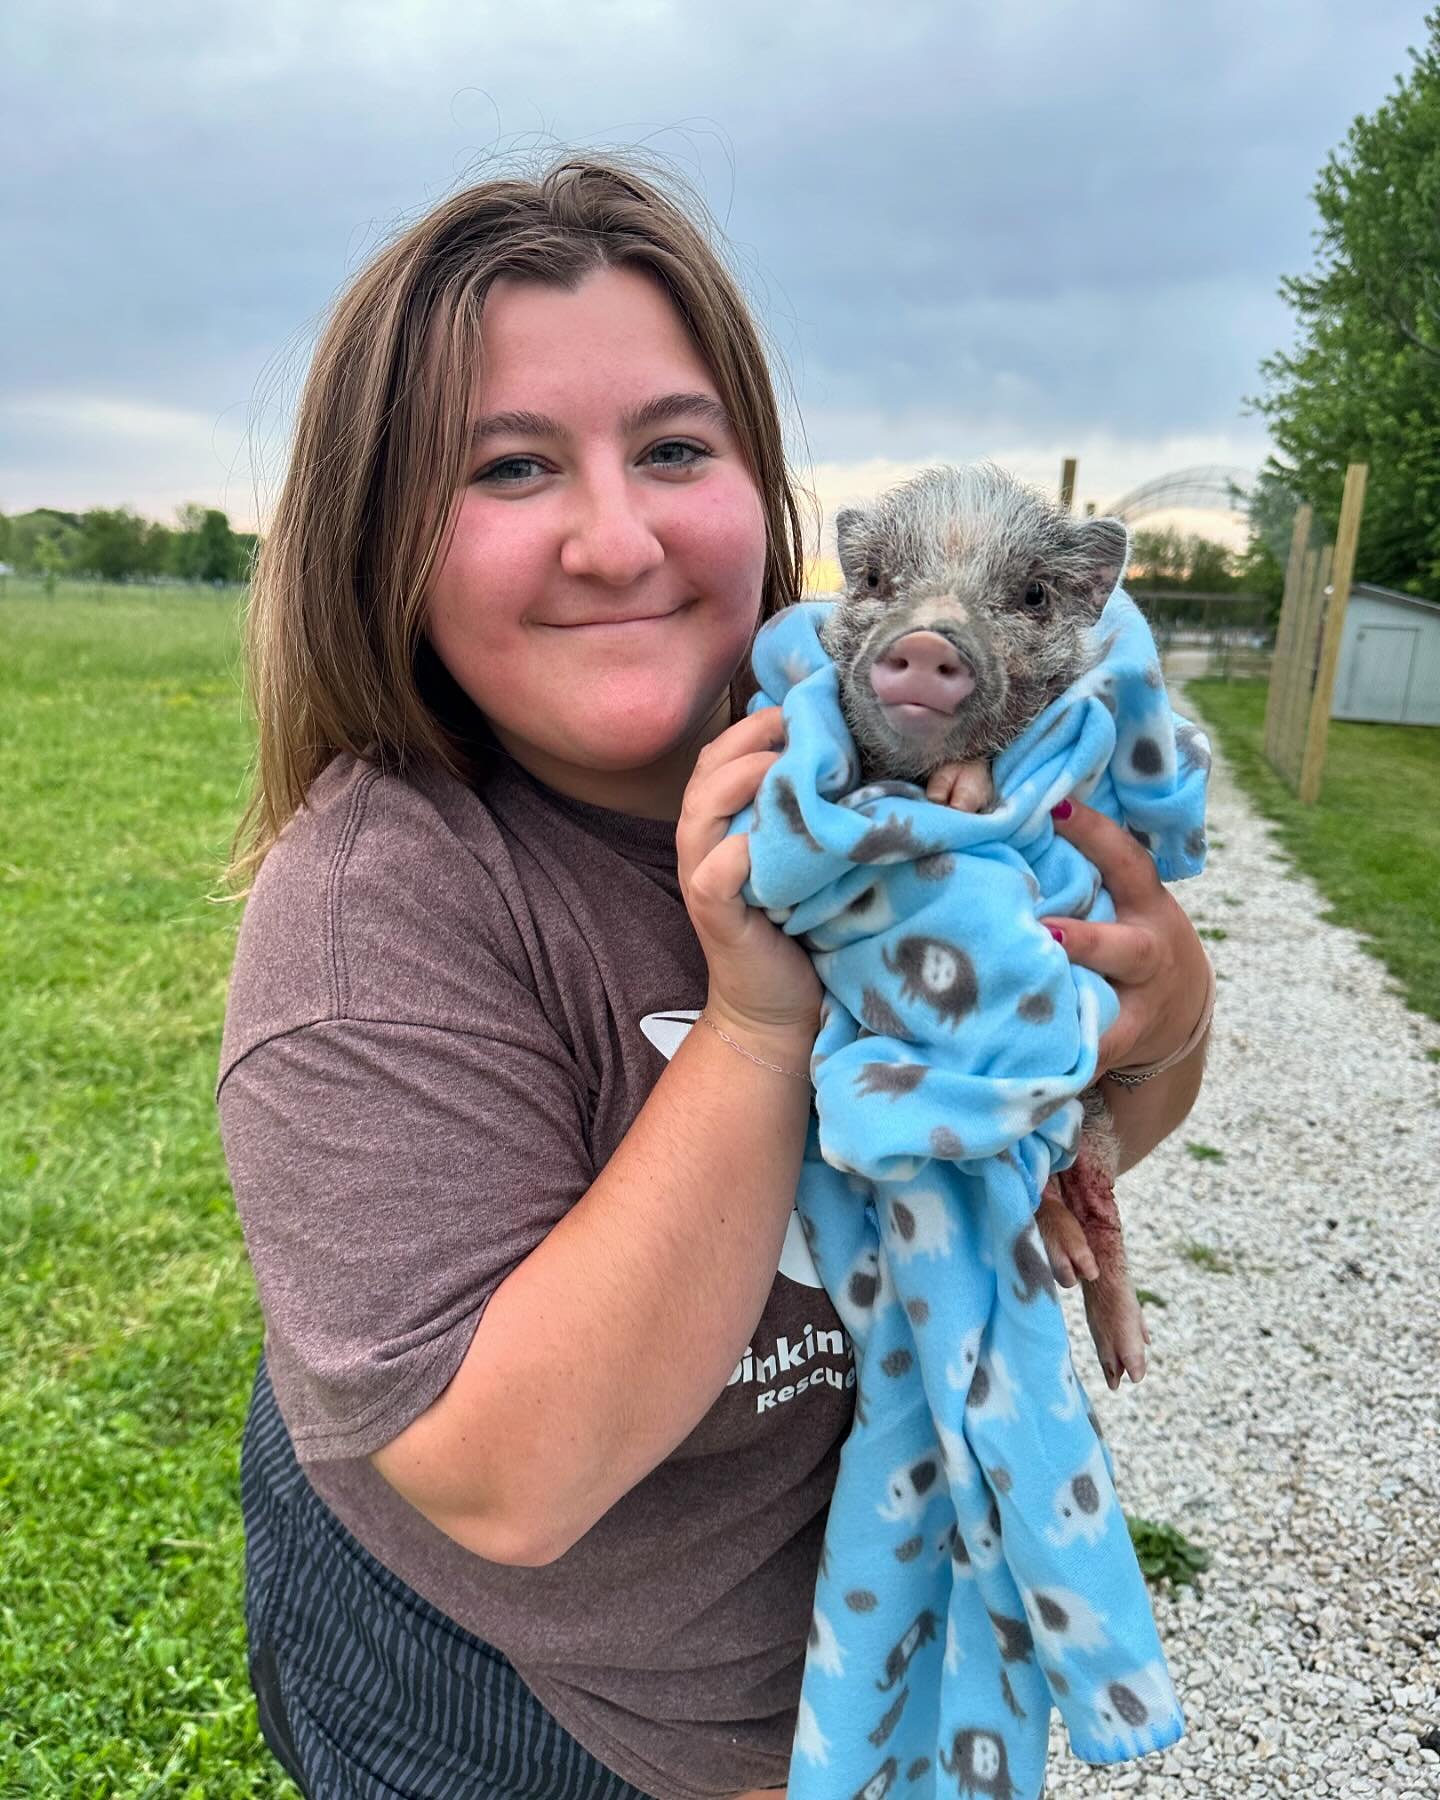 Last Wednesday afternoon, I received a text from Brad that someone was at the barn seeking help with a piglet they recently purchased. I dropped what I was doing and headed to the farm to see how I could assist. When I arrived, I saw Pete&mdash;wrapp